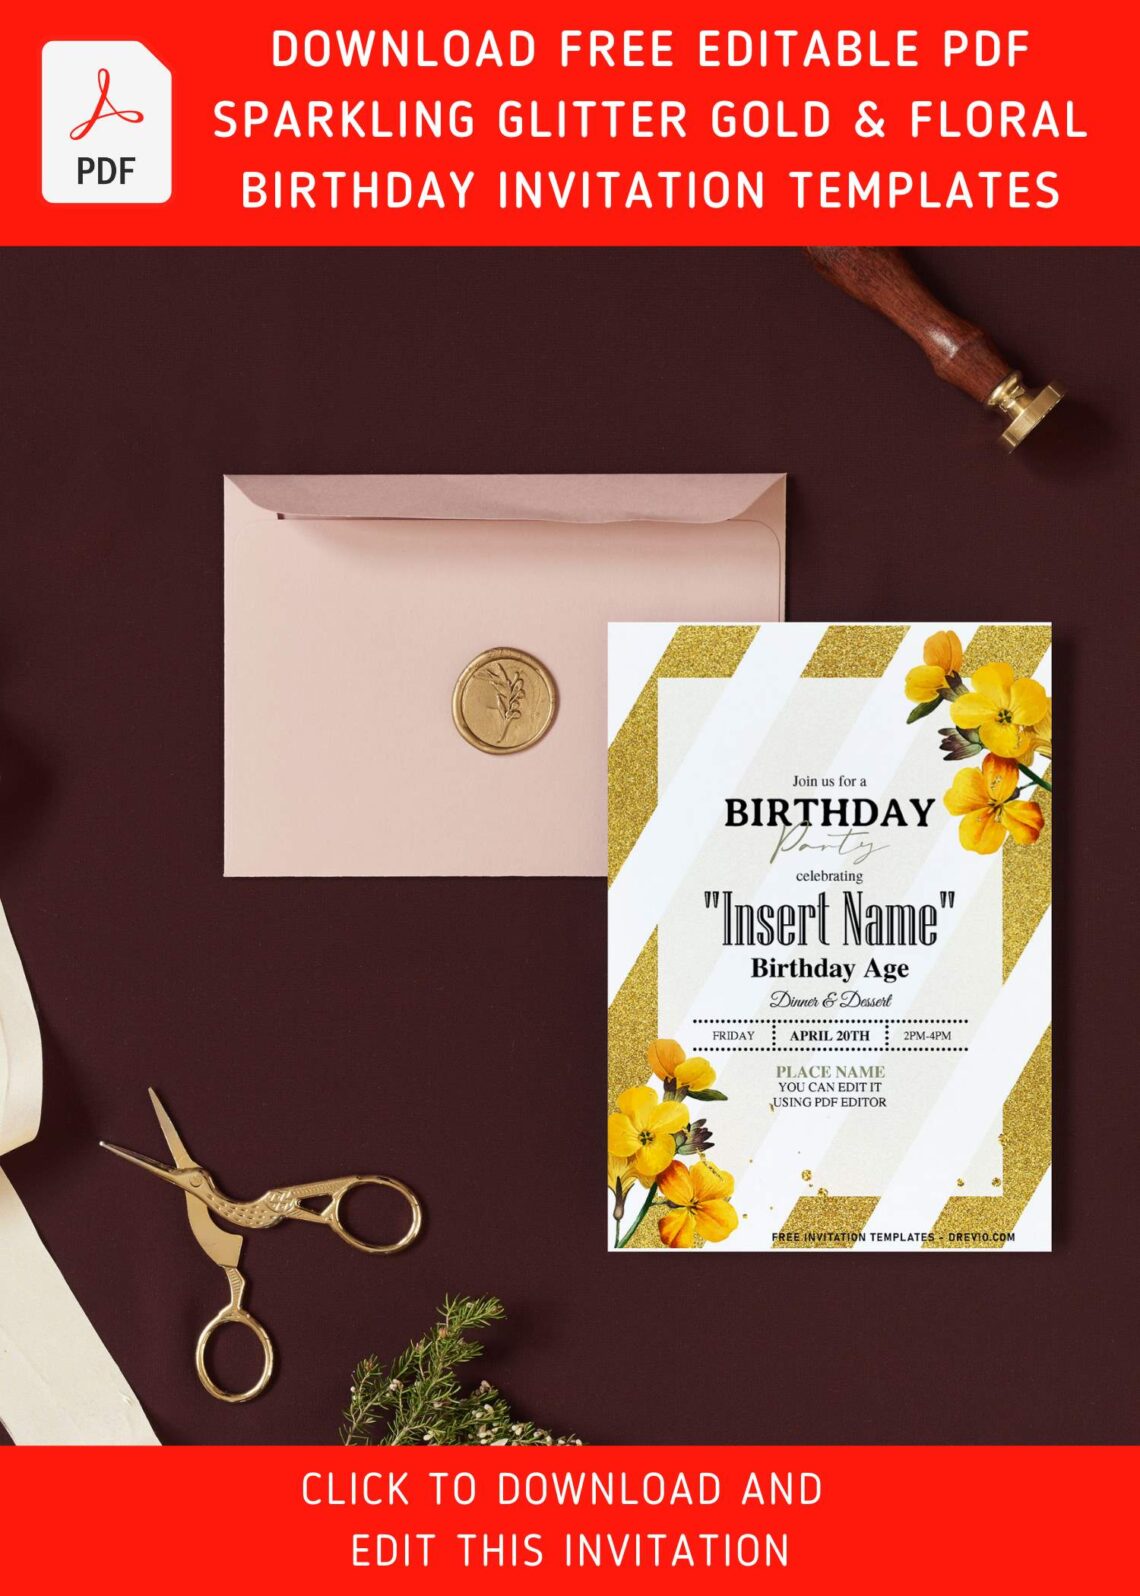 (Free Editable PDF) Shimmering Gold Glitter And Floral Invitation Templates with editable text